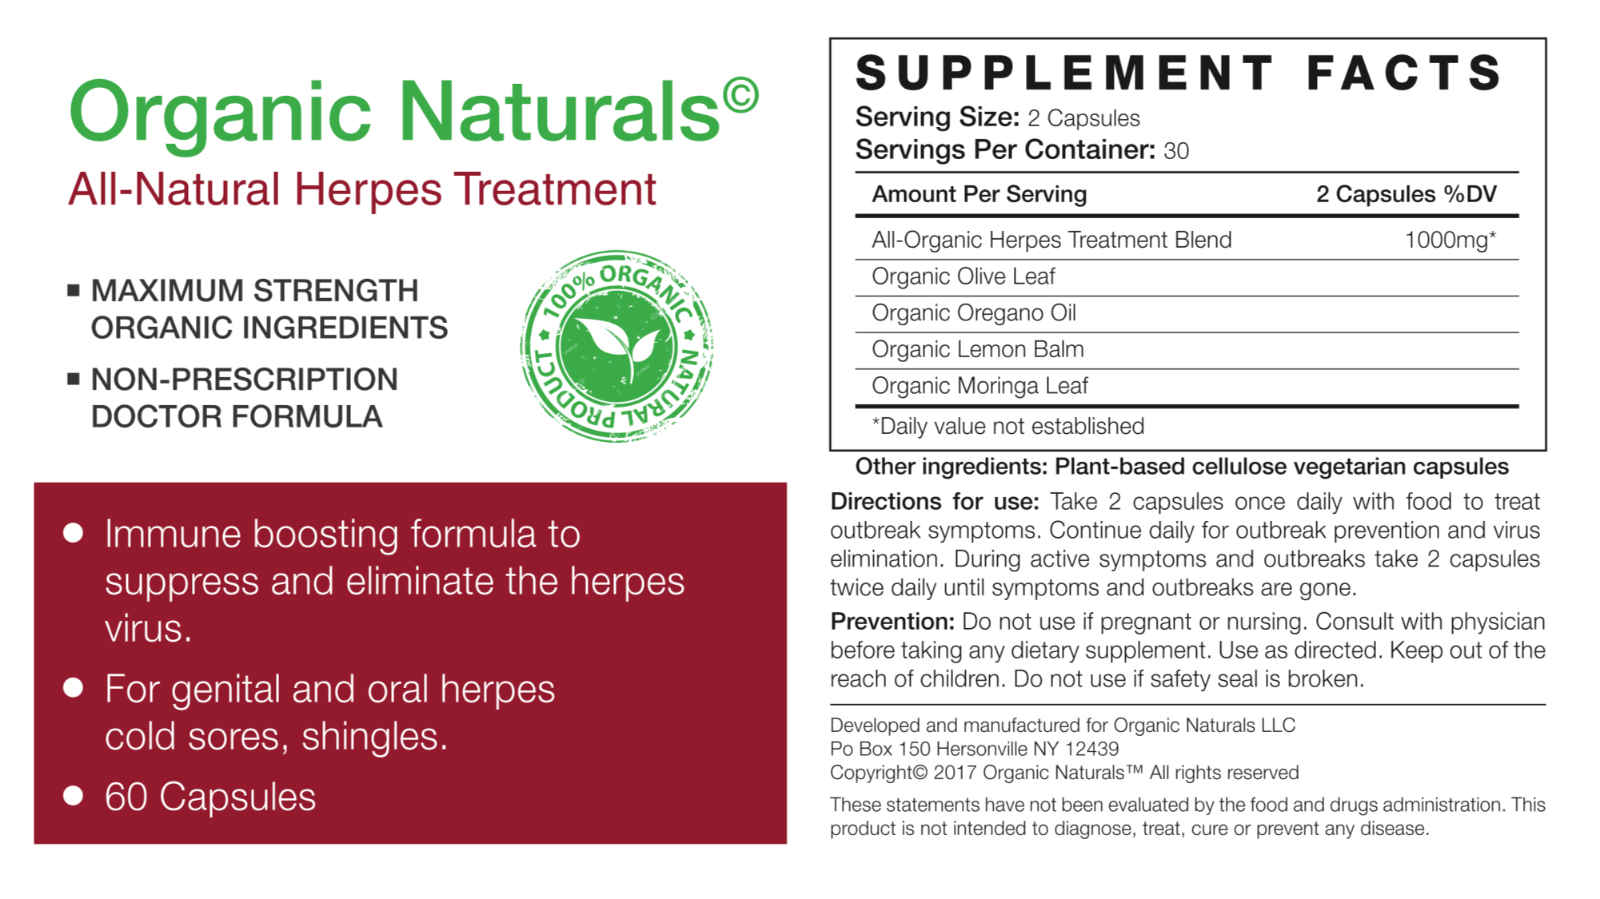 All-Natural Herpes Treatment Capsules - by Organic Naturals - 60 Capsules 8